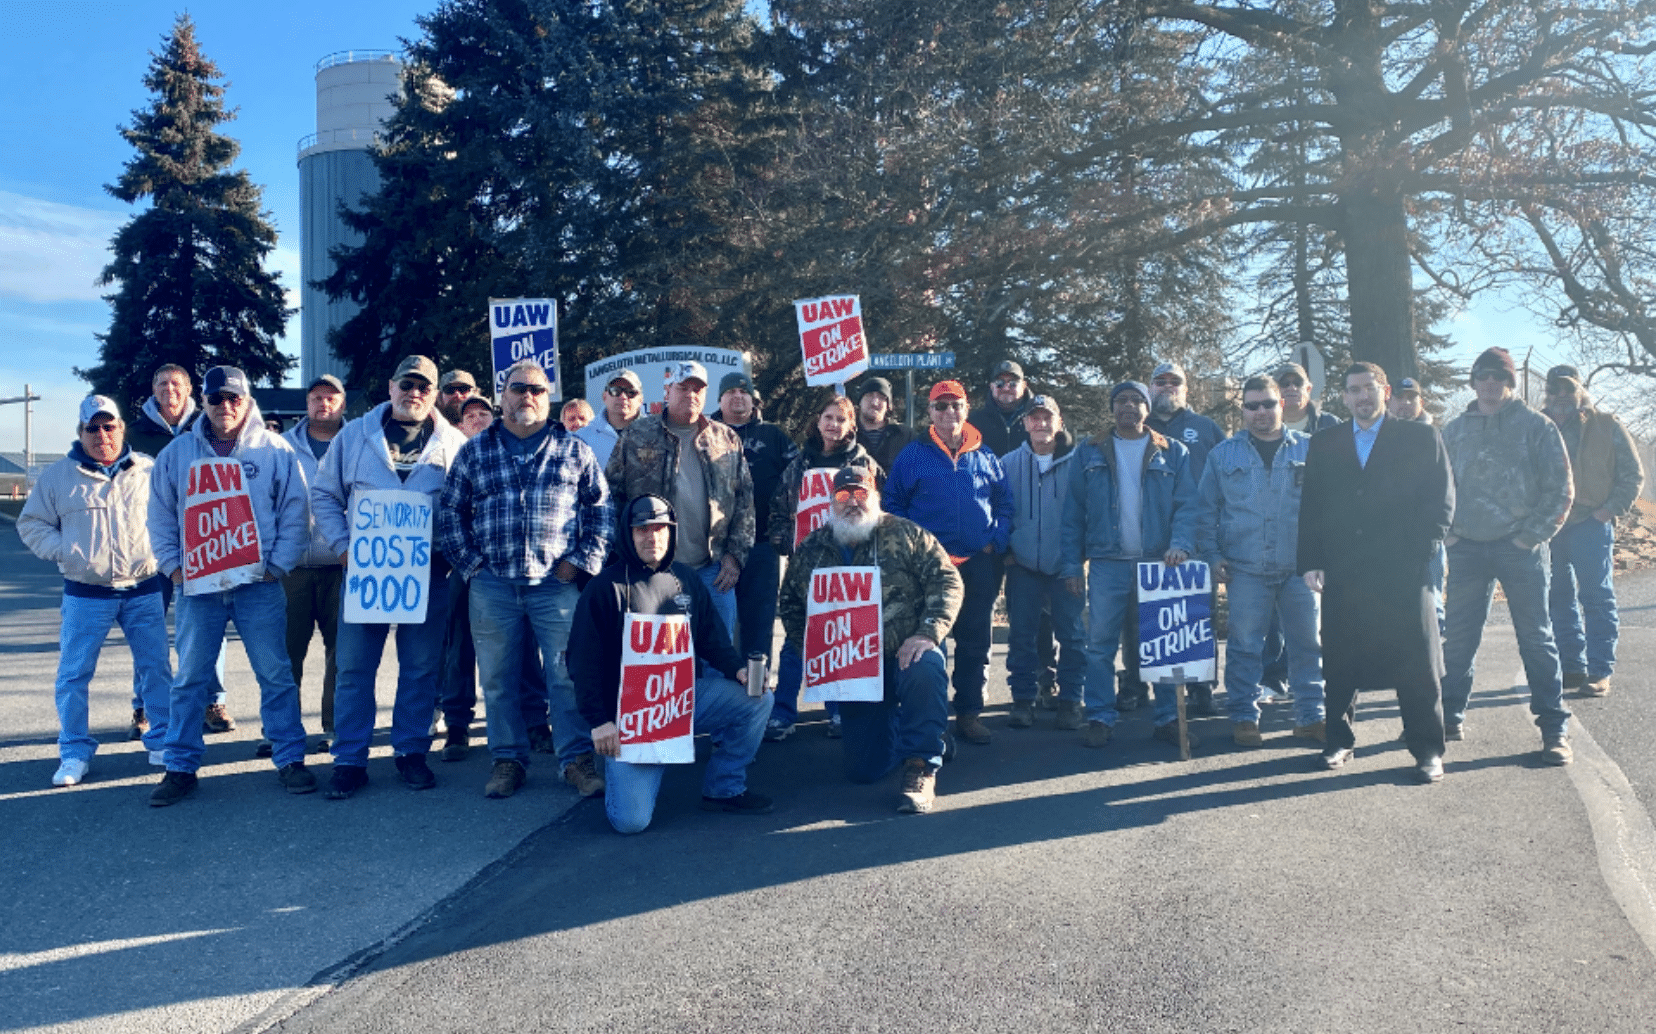 State Representative Wants to Help End Langeloth Metallurgical Plant Strike